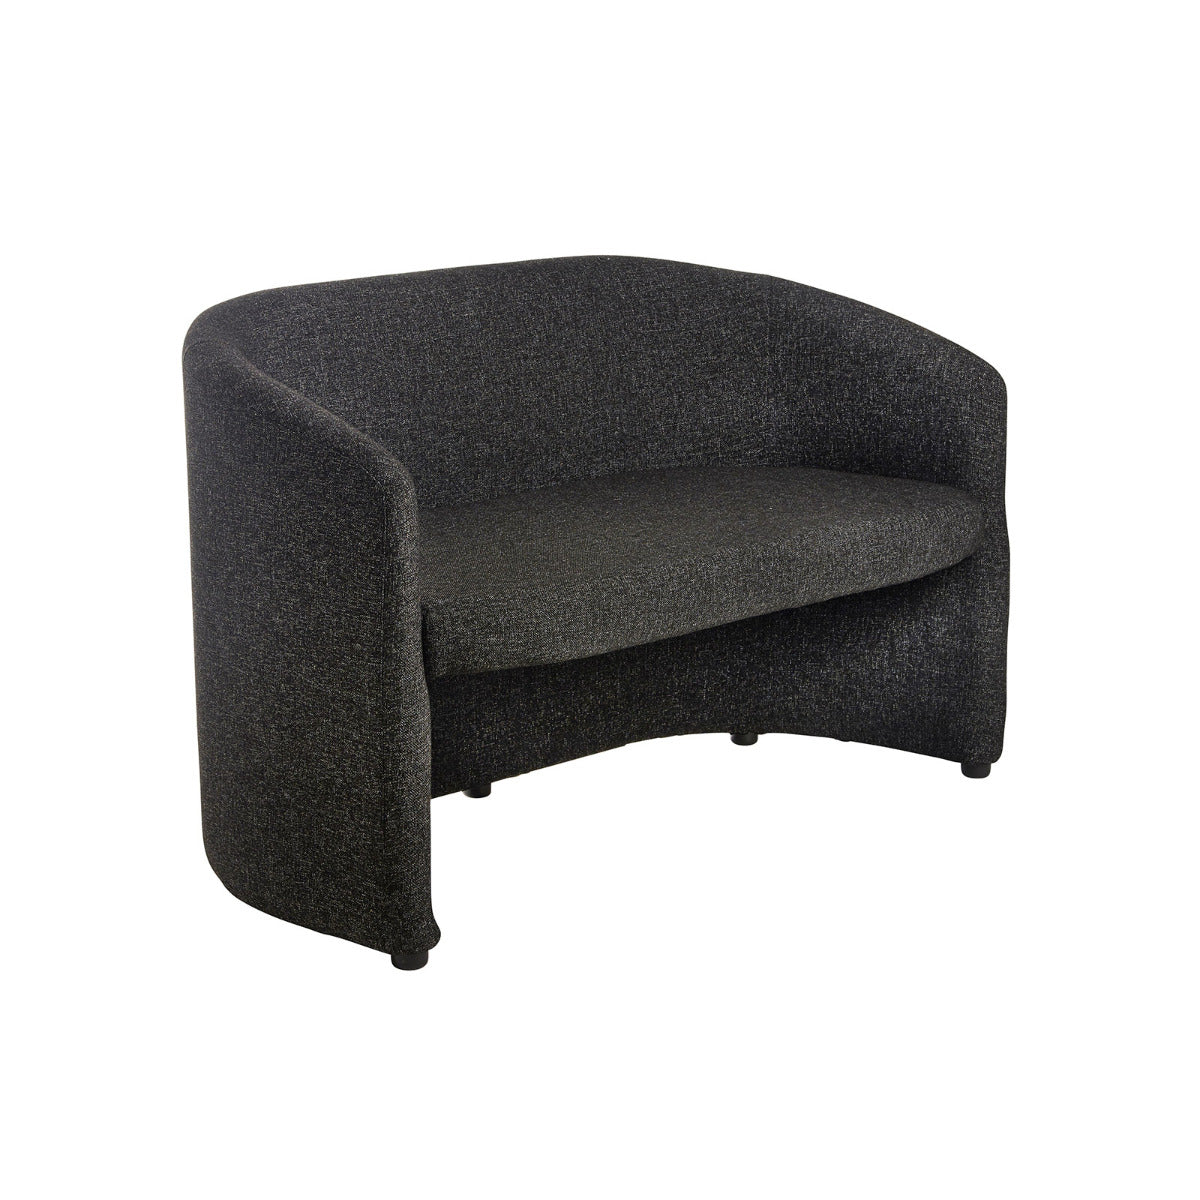 Slender Fabric Sofa - Black or Blue - 1 & 2 Seater Available